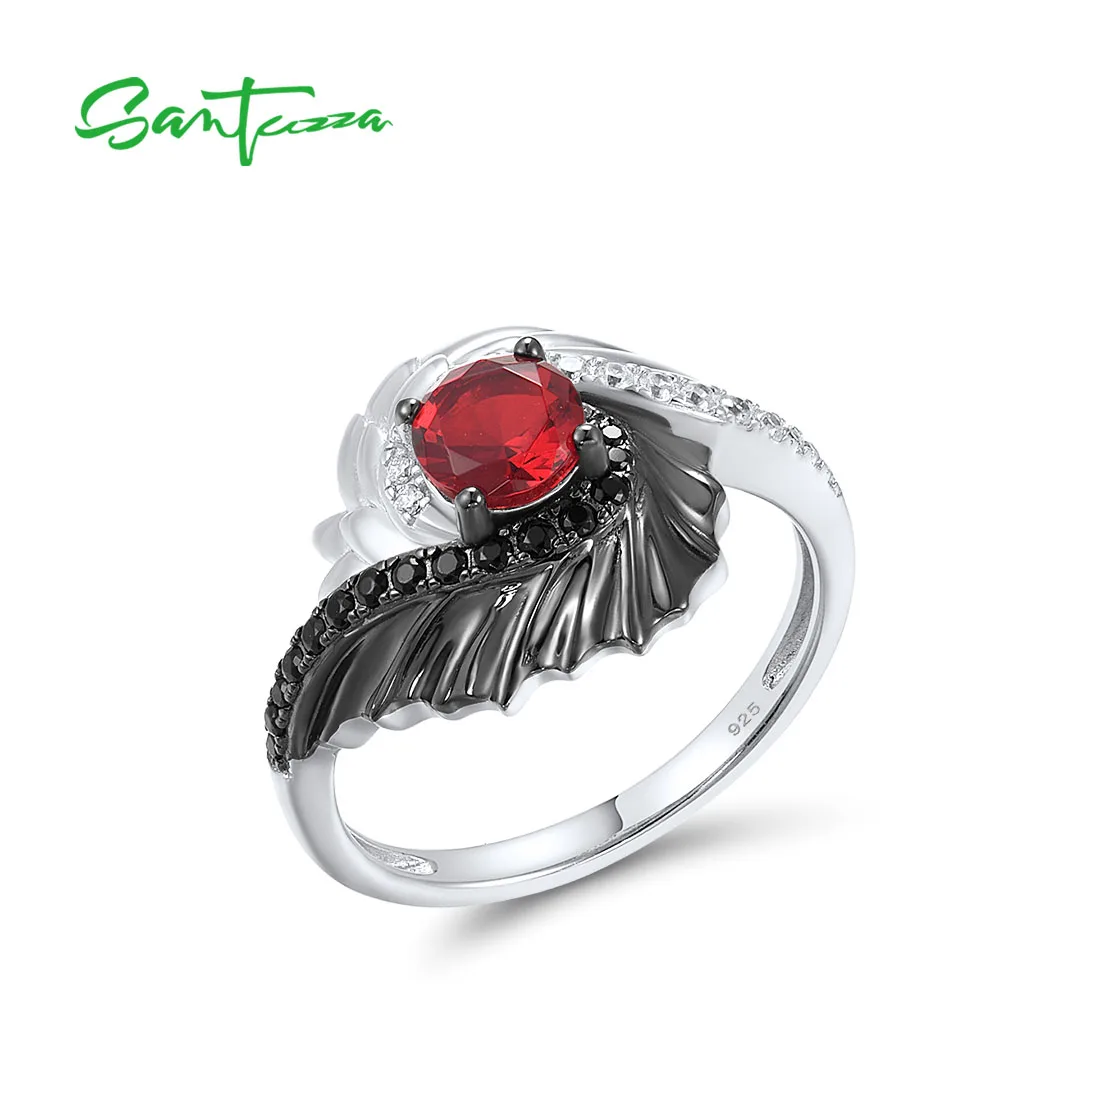 SANTUZZA Silver Rings For Women Pure 925 Sterling Silver Sparkling Red & Black Wings White Cubic Zirconia Gorgeous Fine Jewelry